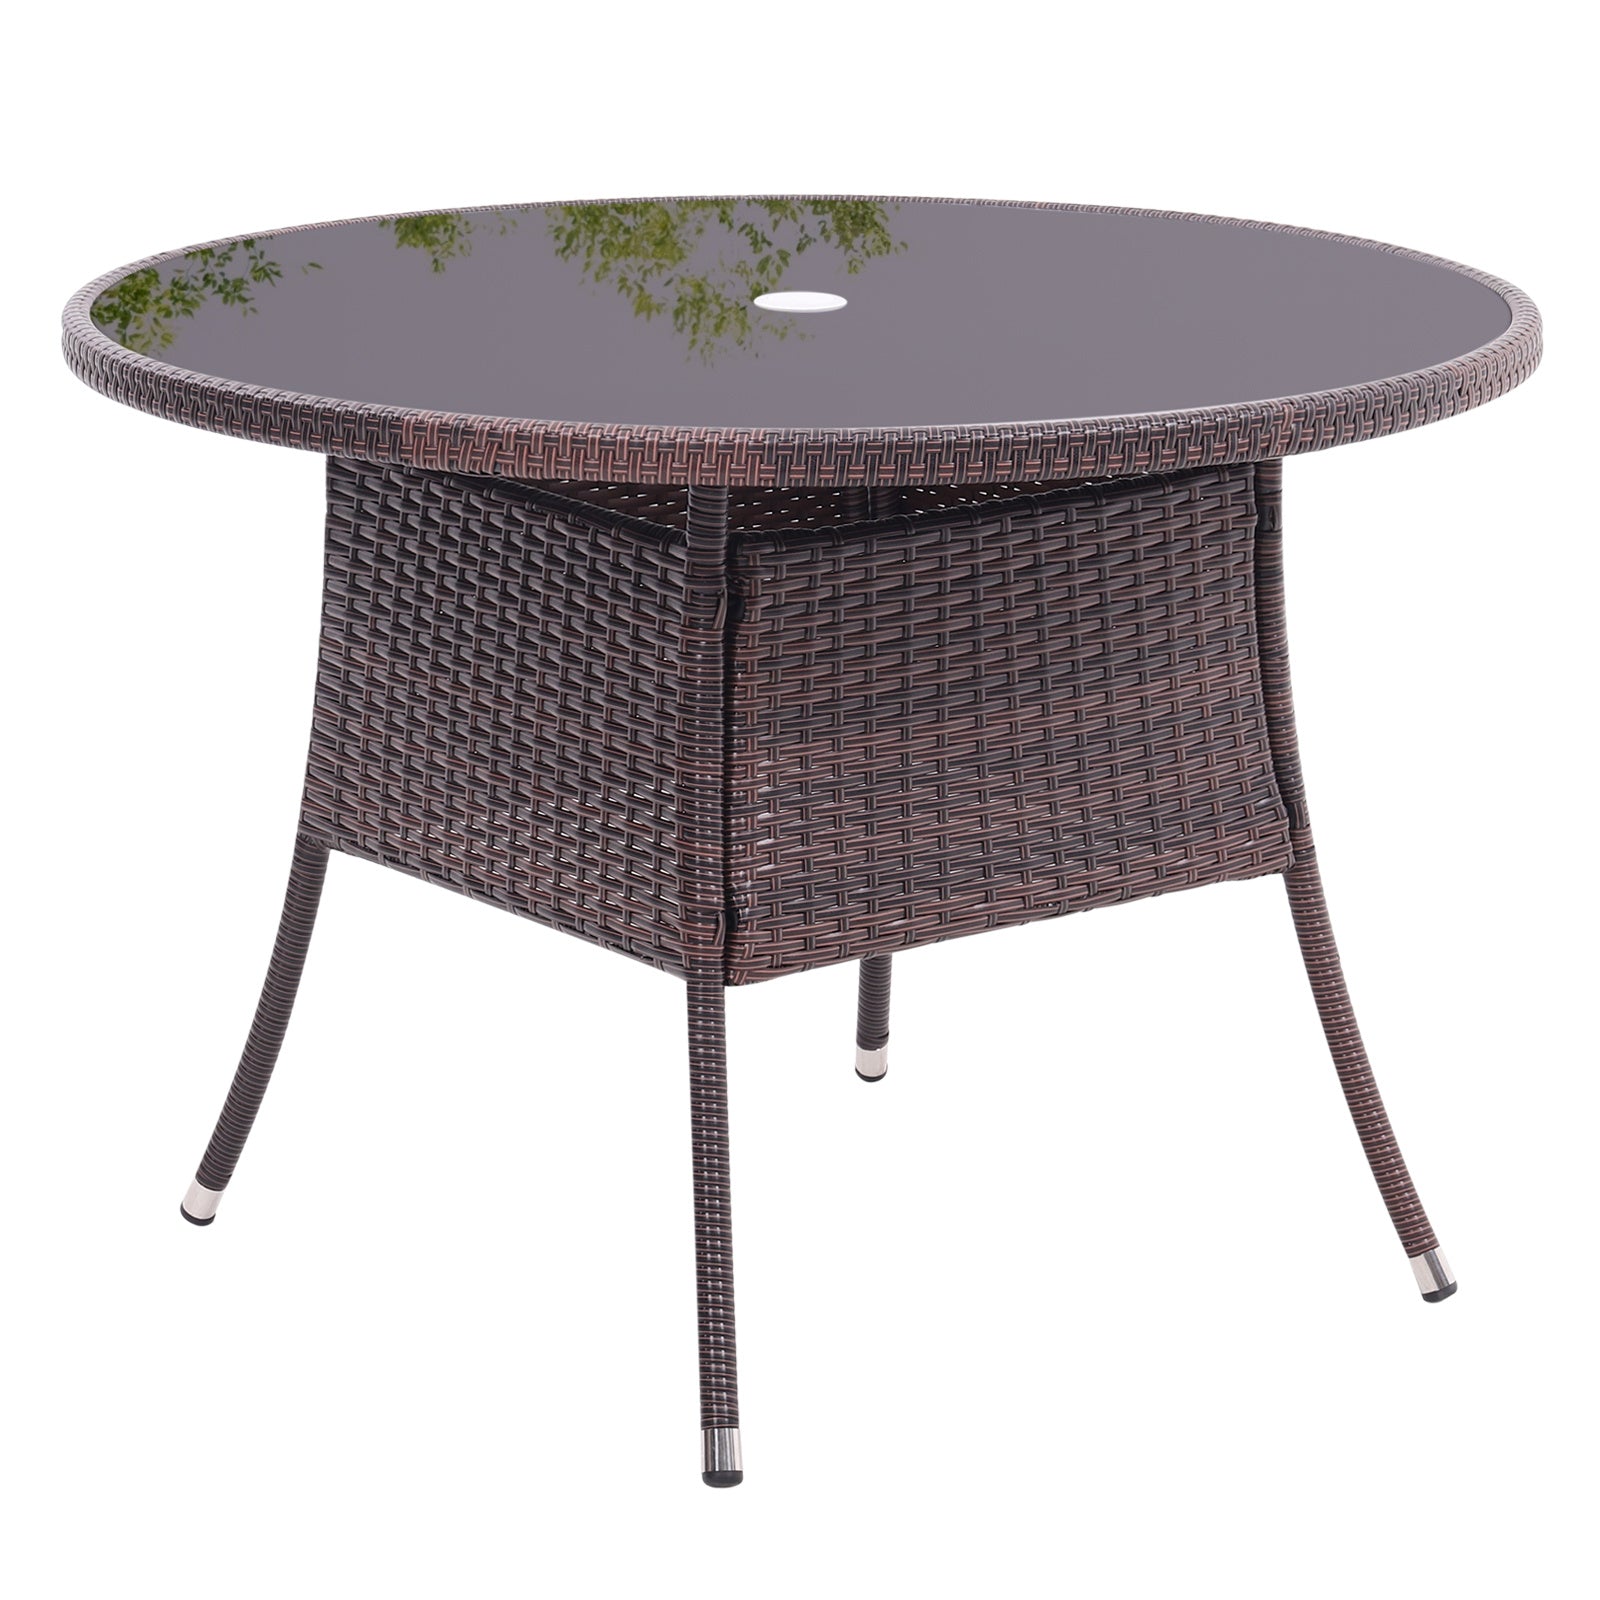 105cm Round/ Square Coffee Table Bistro Outdoor Garden Patio Tables & Parasol Hole Garden Dining Table Living and Home Round Brown 